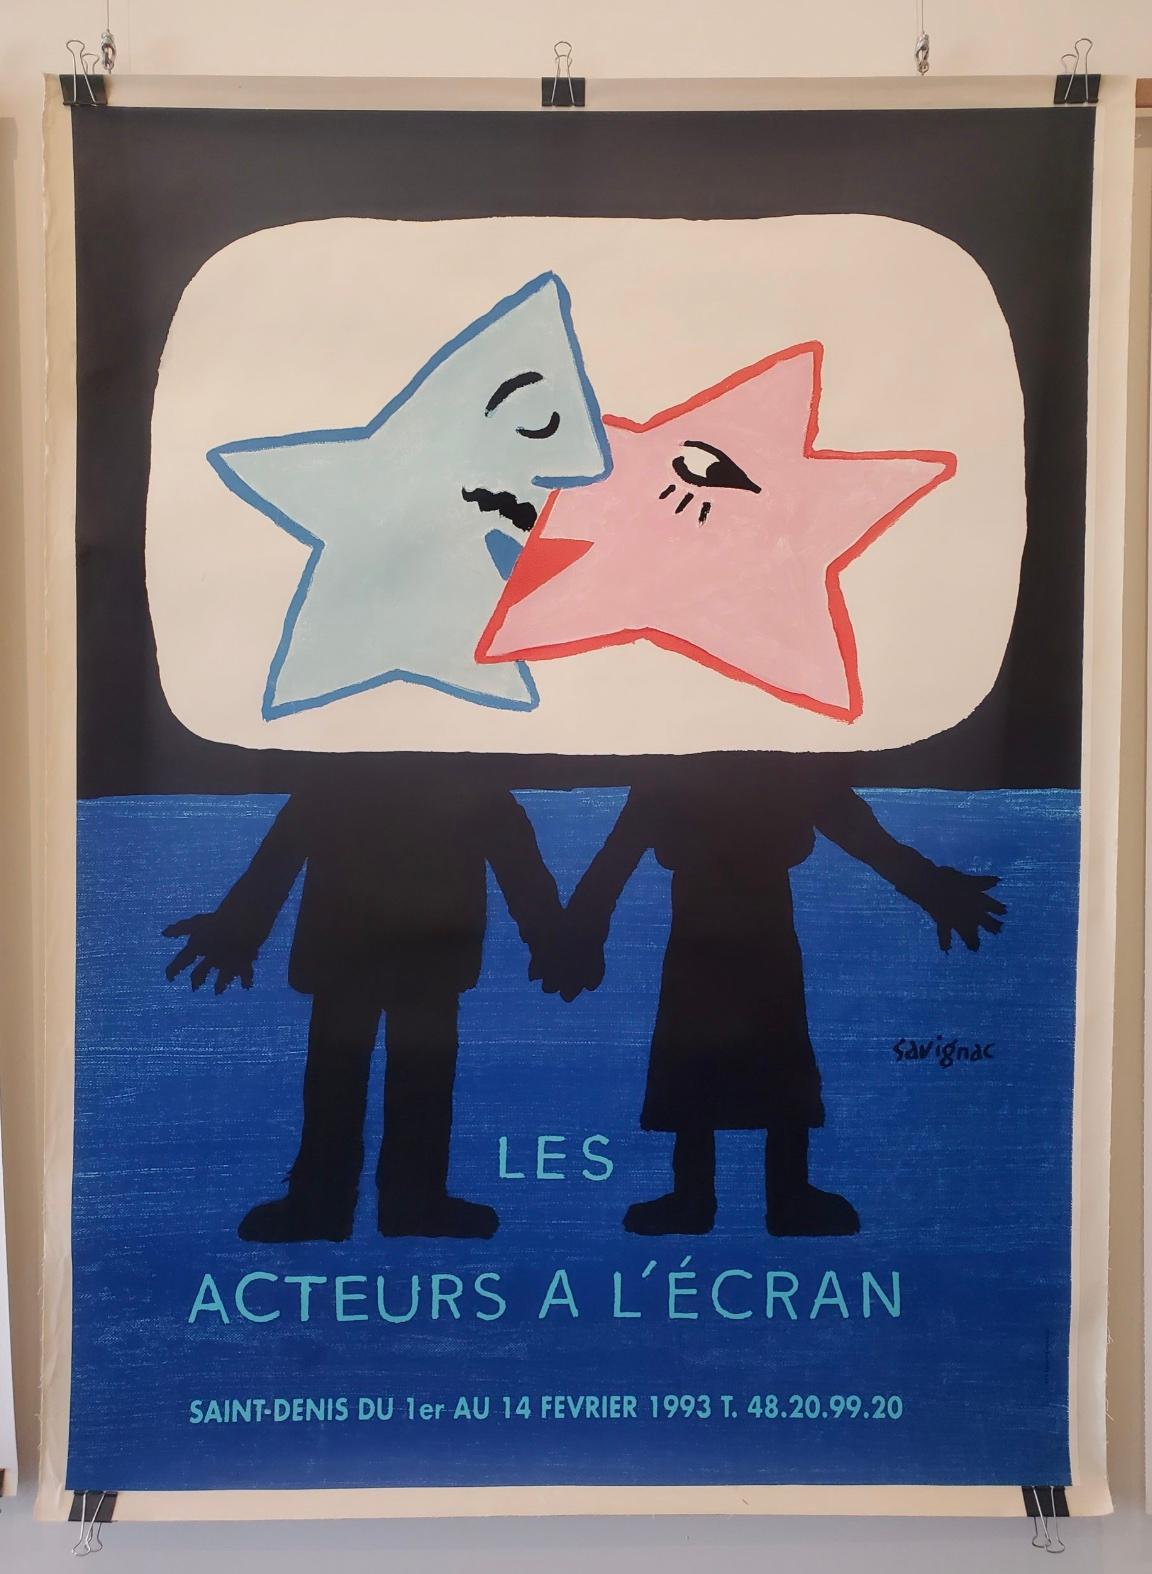 'Les Acteurs A L’ecran' by SAVIGNAC, French Festival of Cinema Poster, 1993 In Good Condition For Sale In Melbourne, Victoria